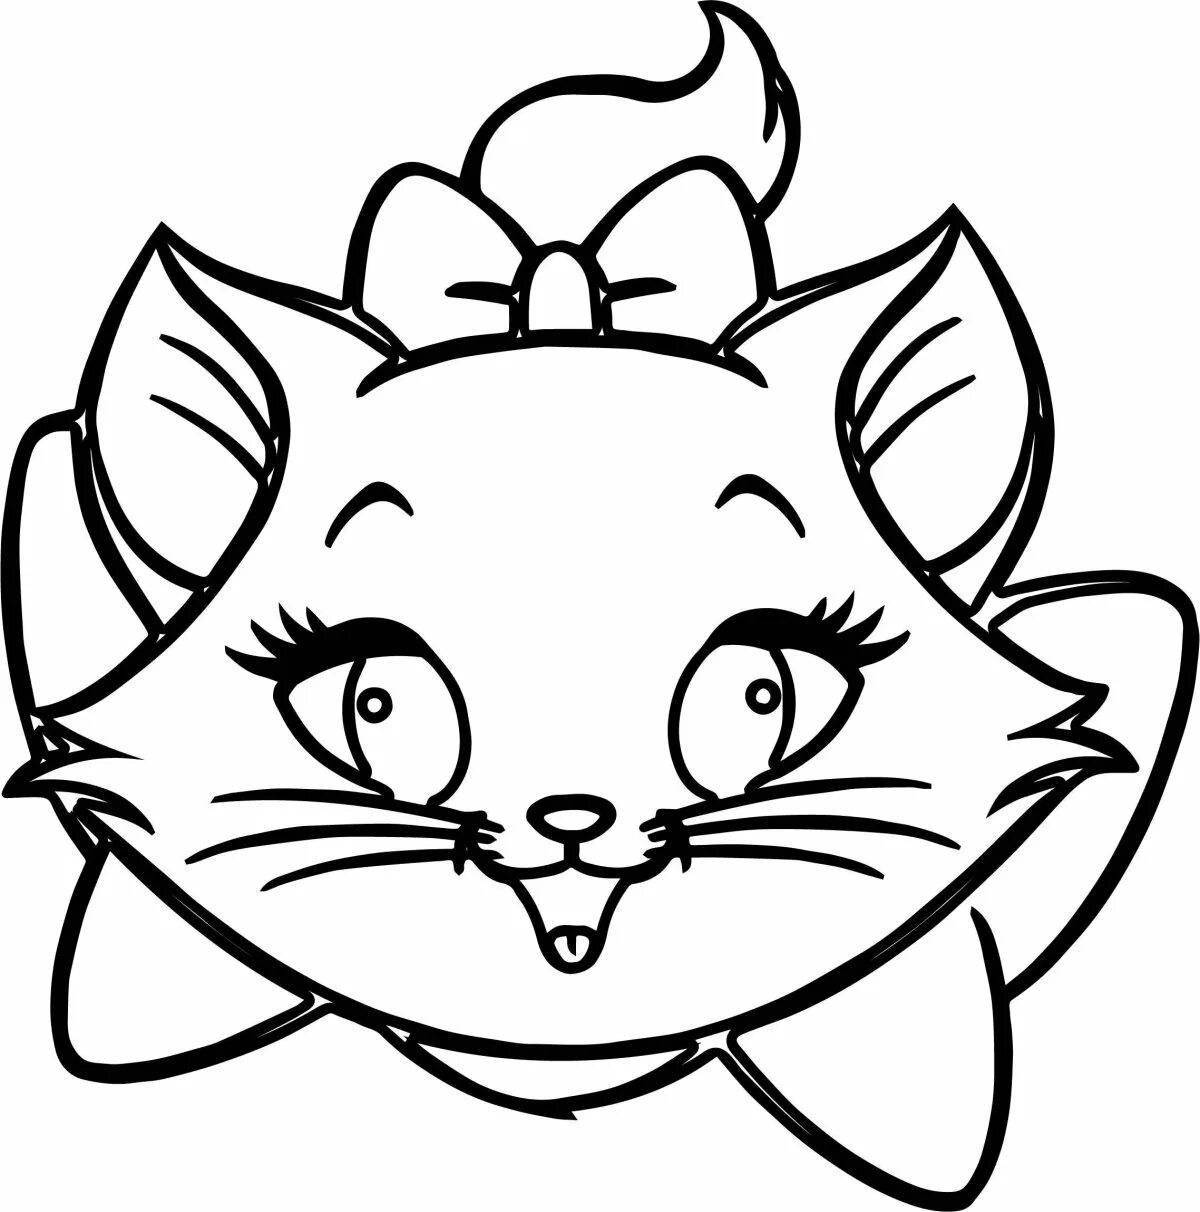 Coloring page beautiful cat mask